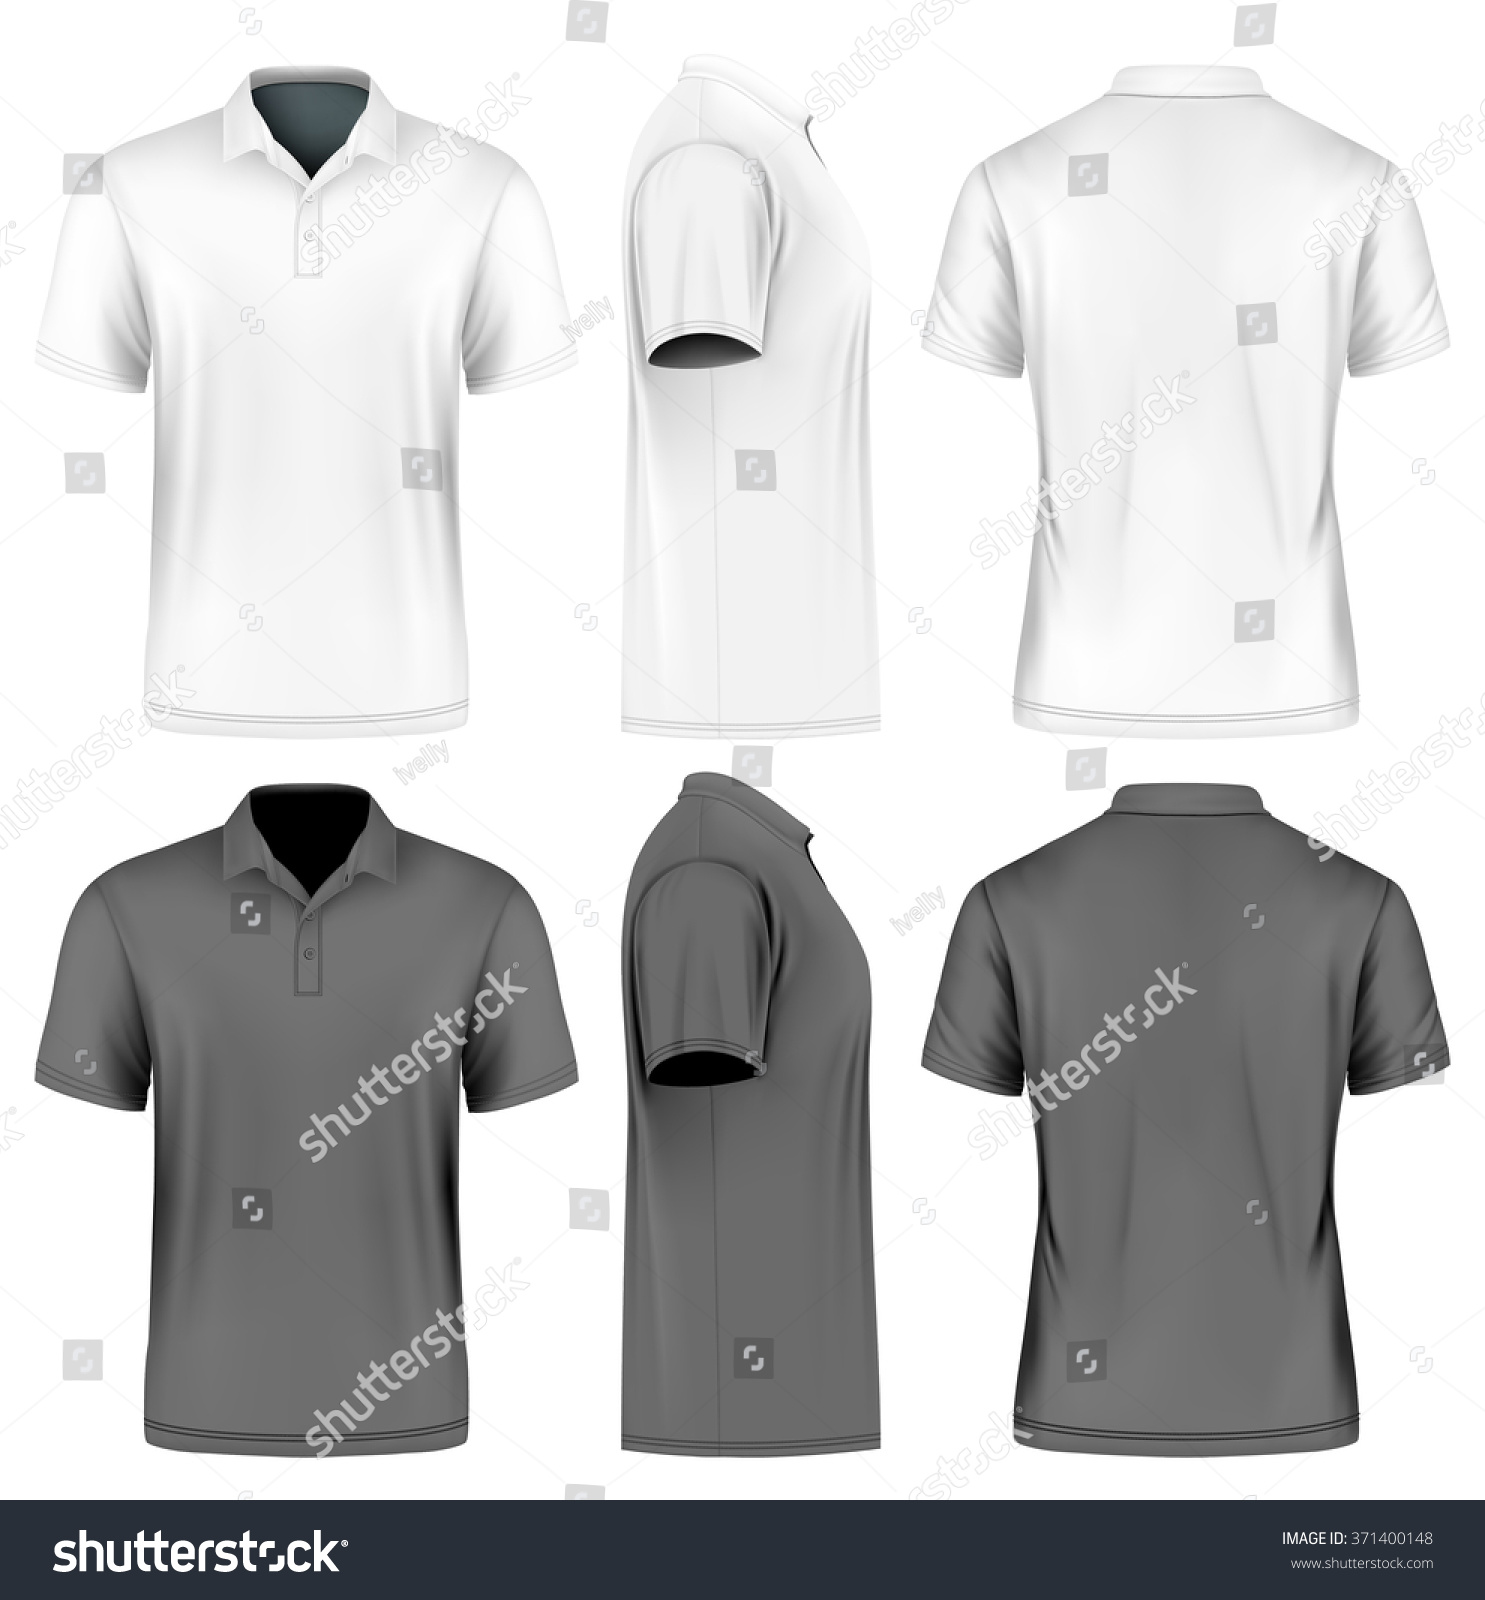 Men'S Slim-Fitting Short Sleeve Polo Shirt. Front, Back And Side Views ...